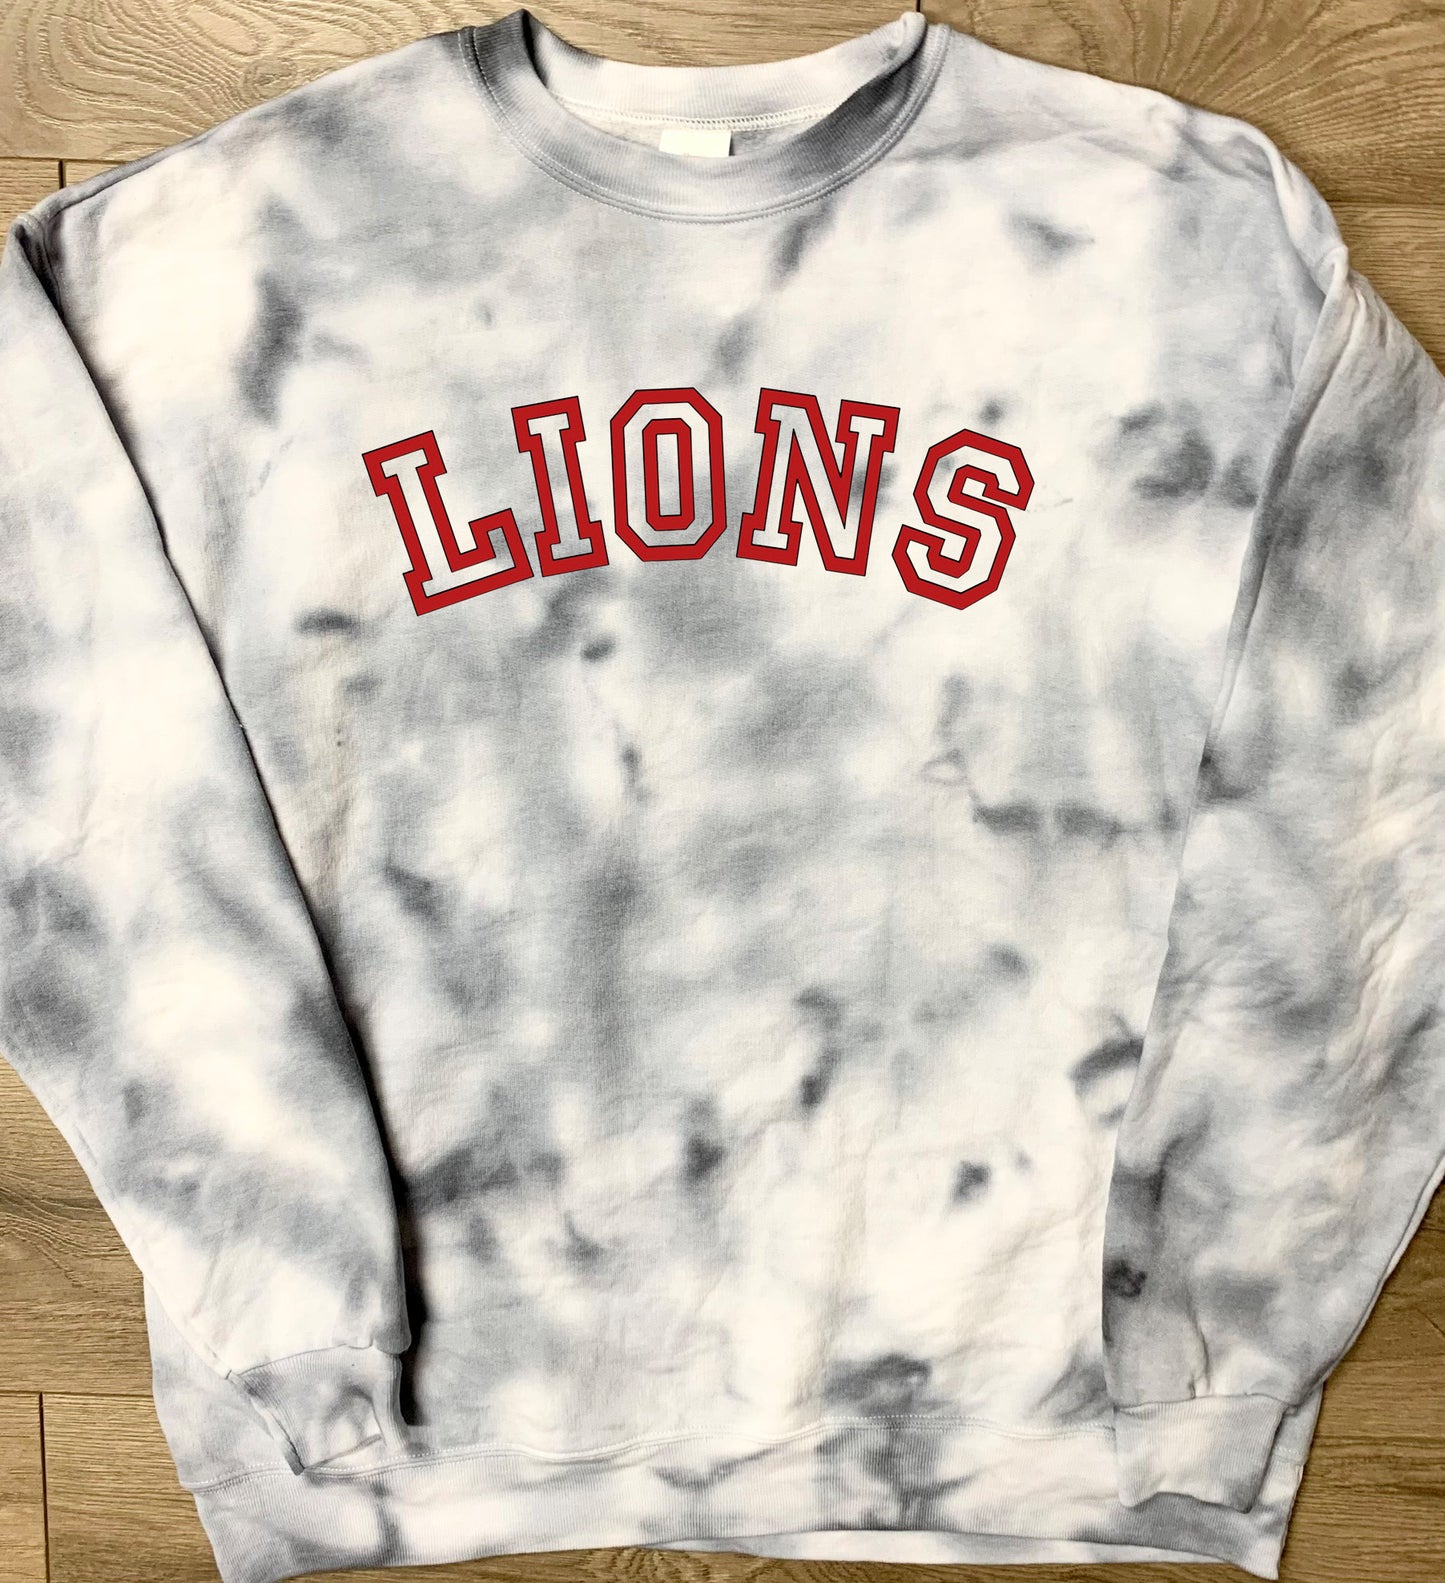 Hand-dyed Adult Liberty Union Lions Gray Curved Block Lions Tie Dye Crewneck Sweatshirt